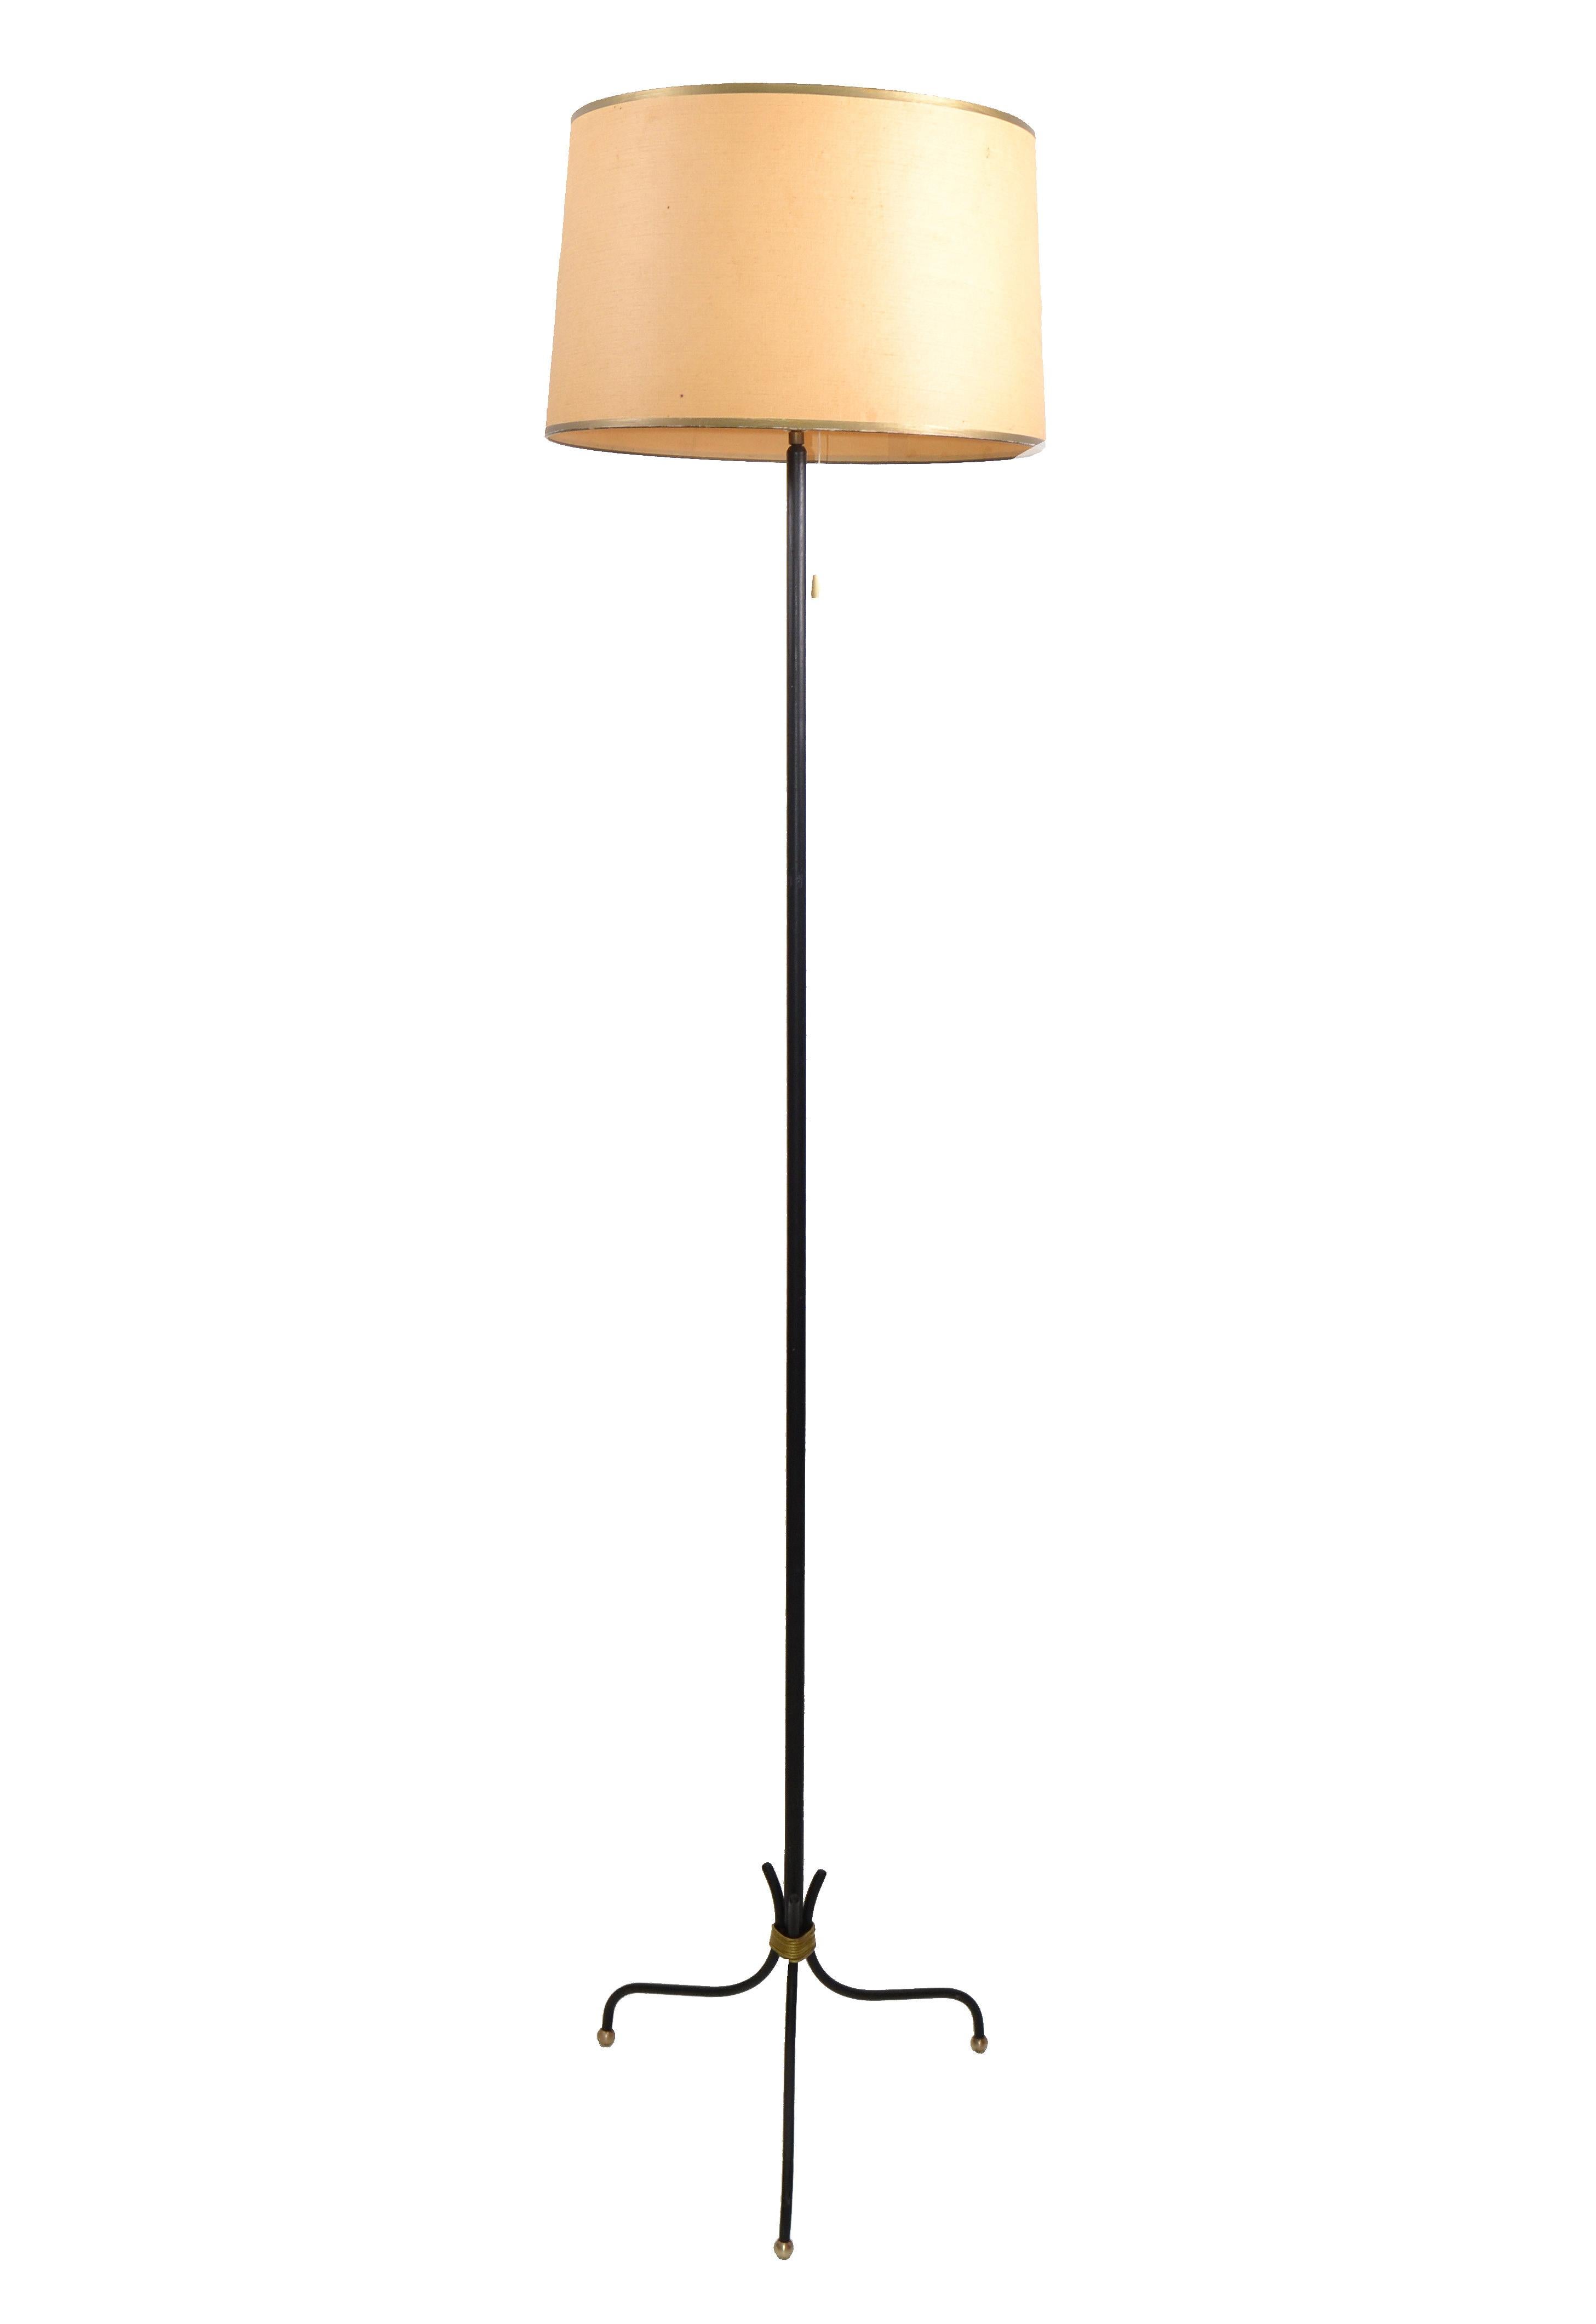 Pierre Guariche Style French Mid-Century Modern Wrought Iron & Brass Floor Lamp 8